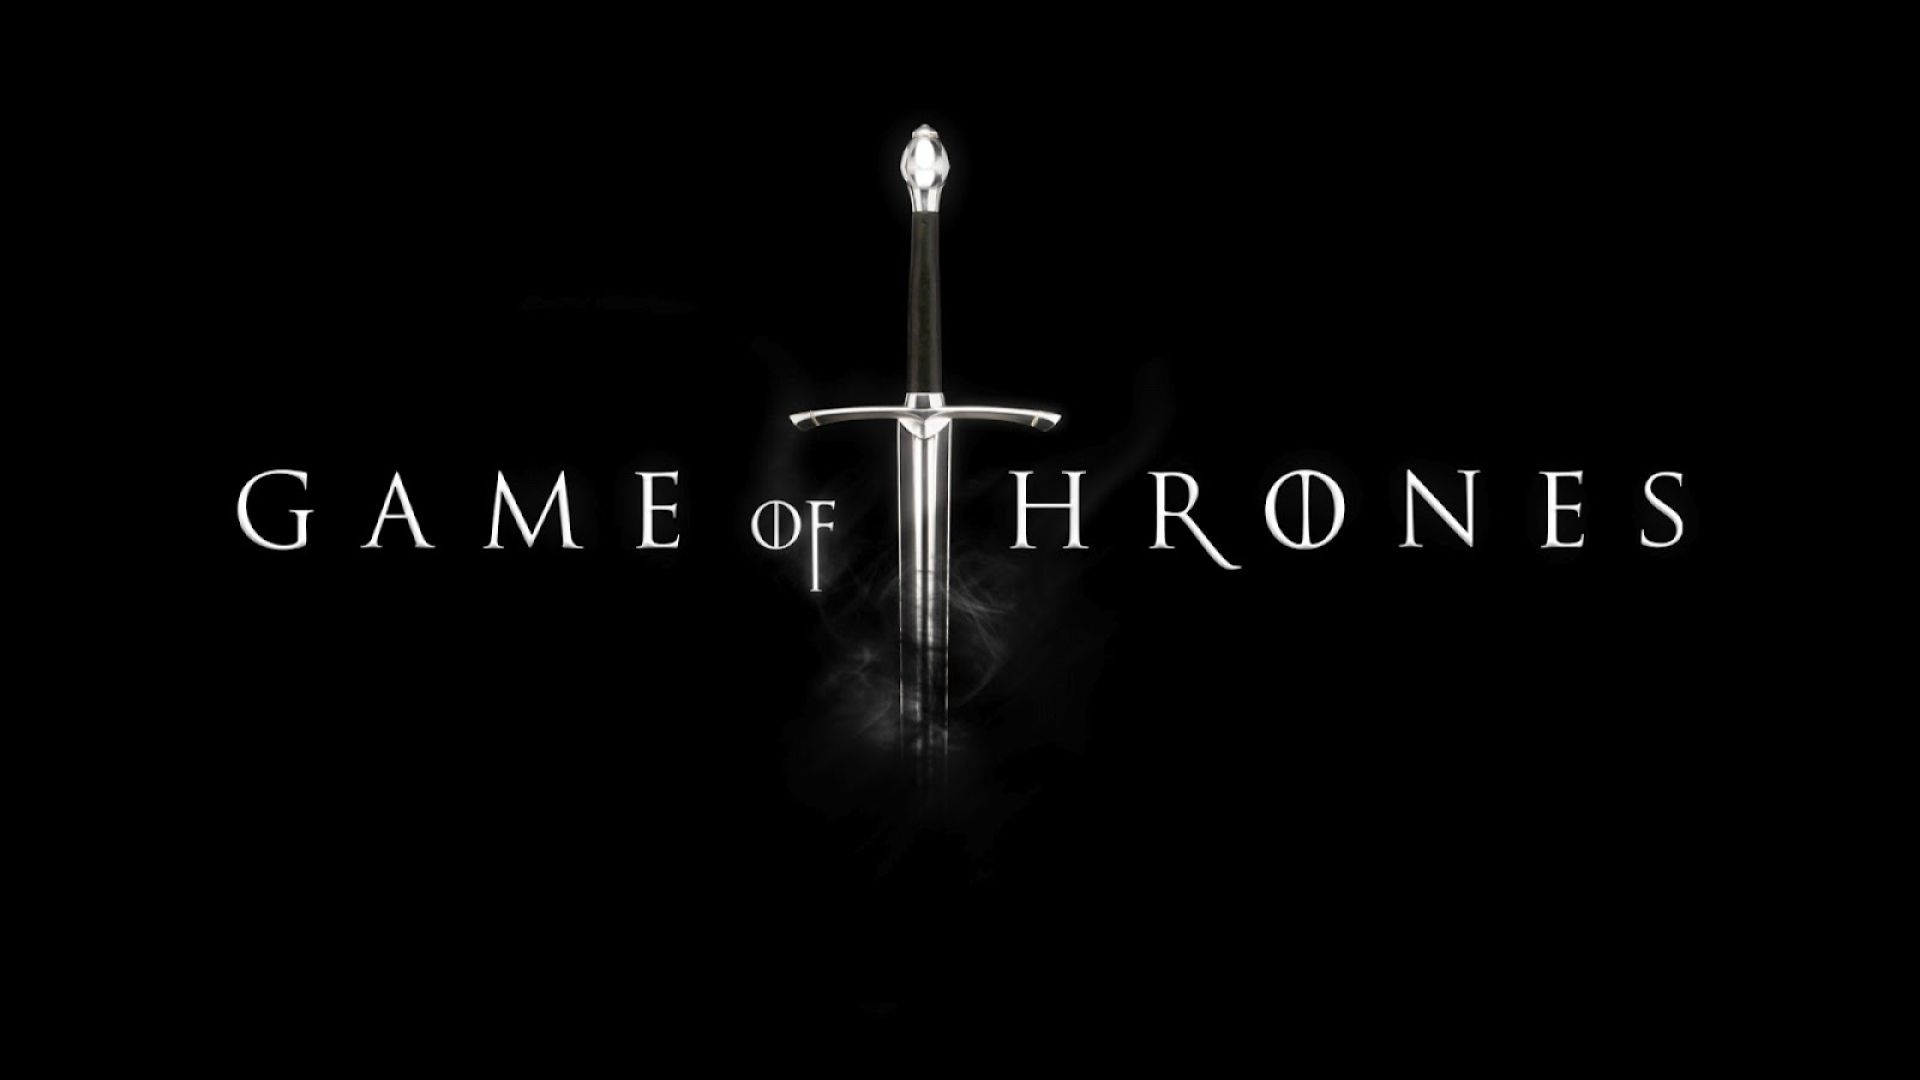 Game Of Thrones Poster Wallpaper 1080P Laptop Full HD Wallpaper, HD Movies 4K Wallpaper, Image, Photo and Background